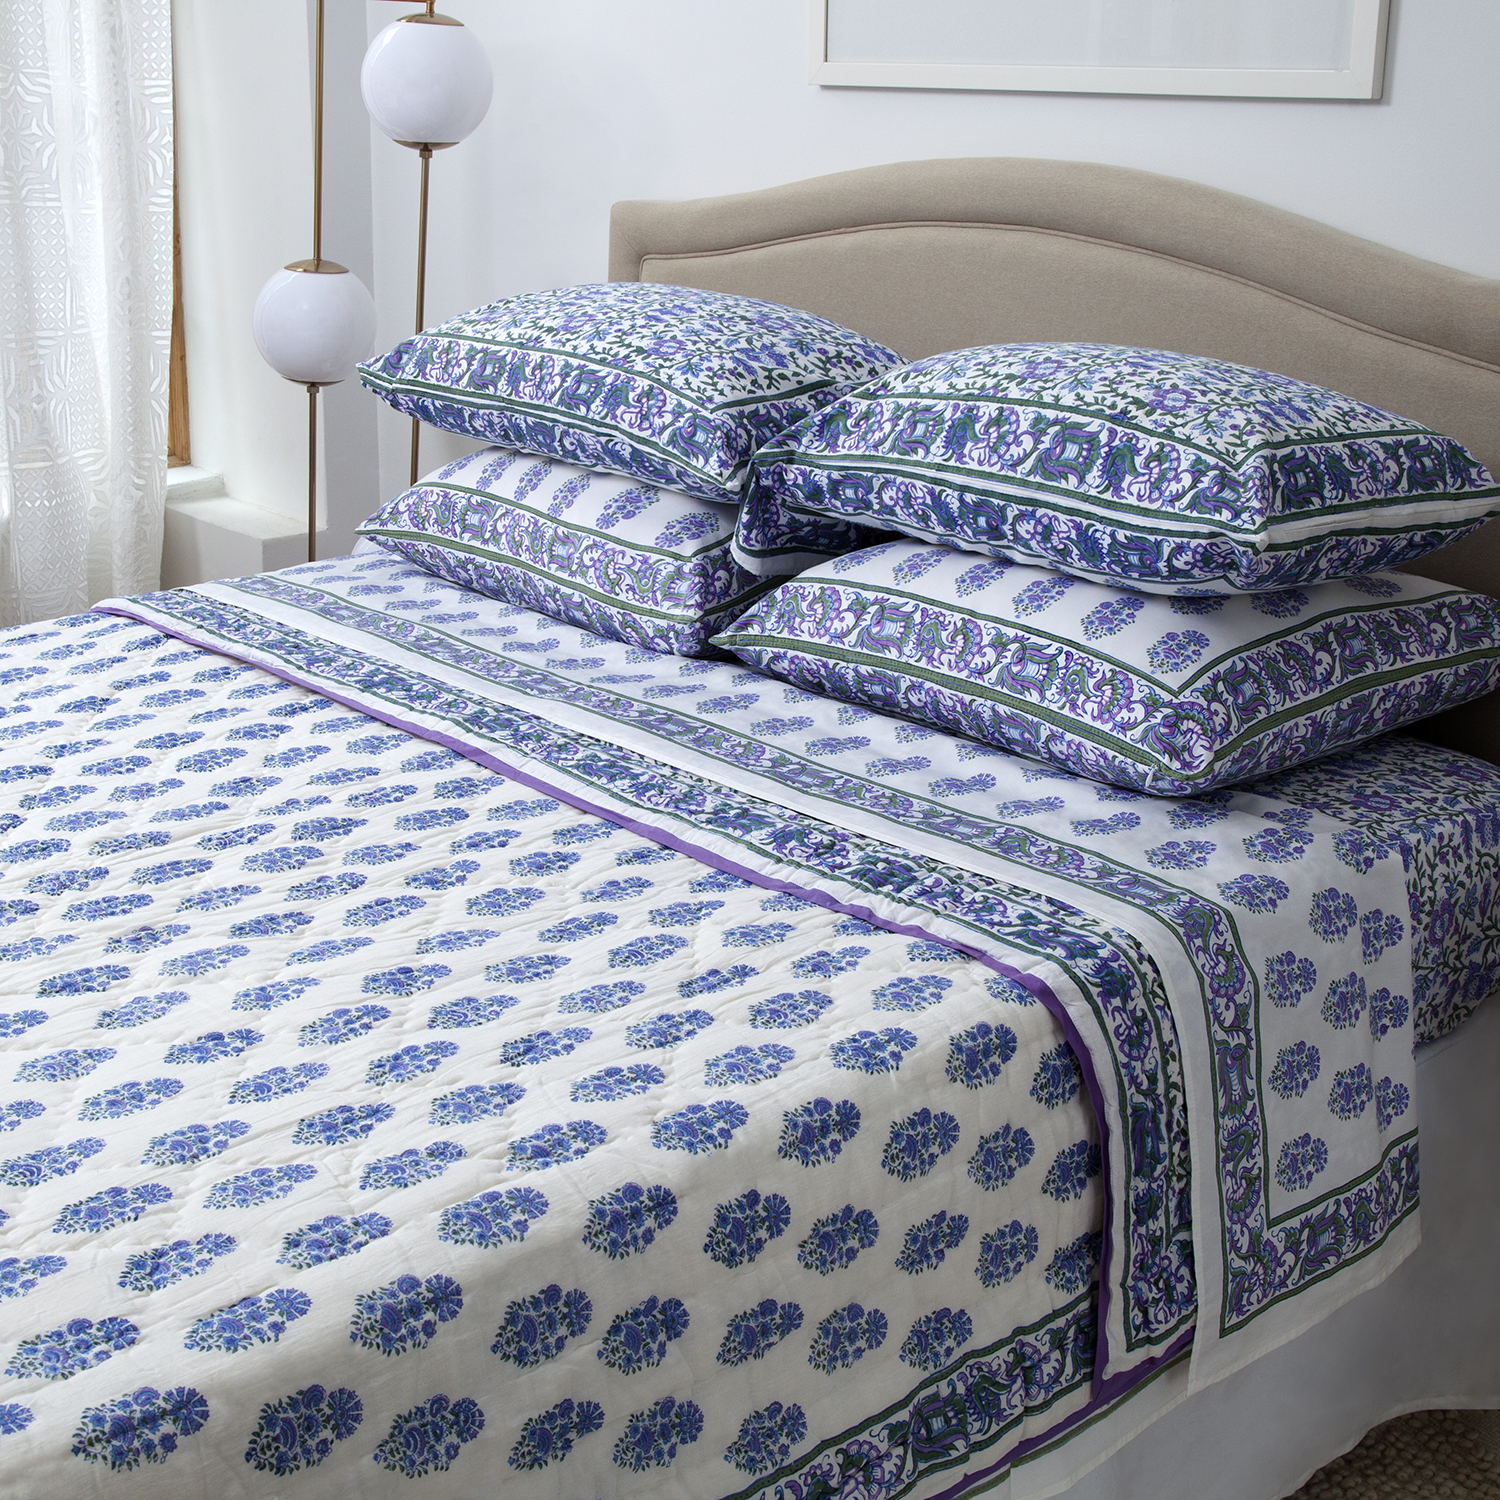 Hand Block Printed Bed Cover Cotton White Queen Bed Sheet Indian Bedspread Set 